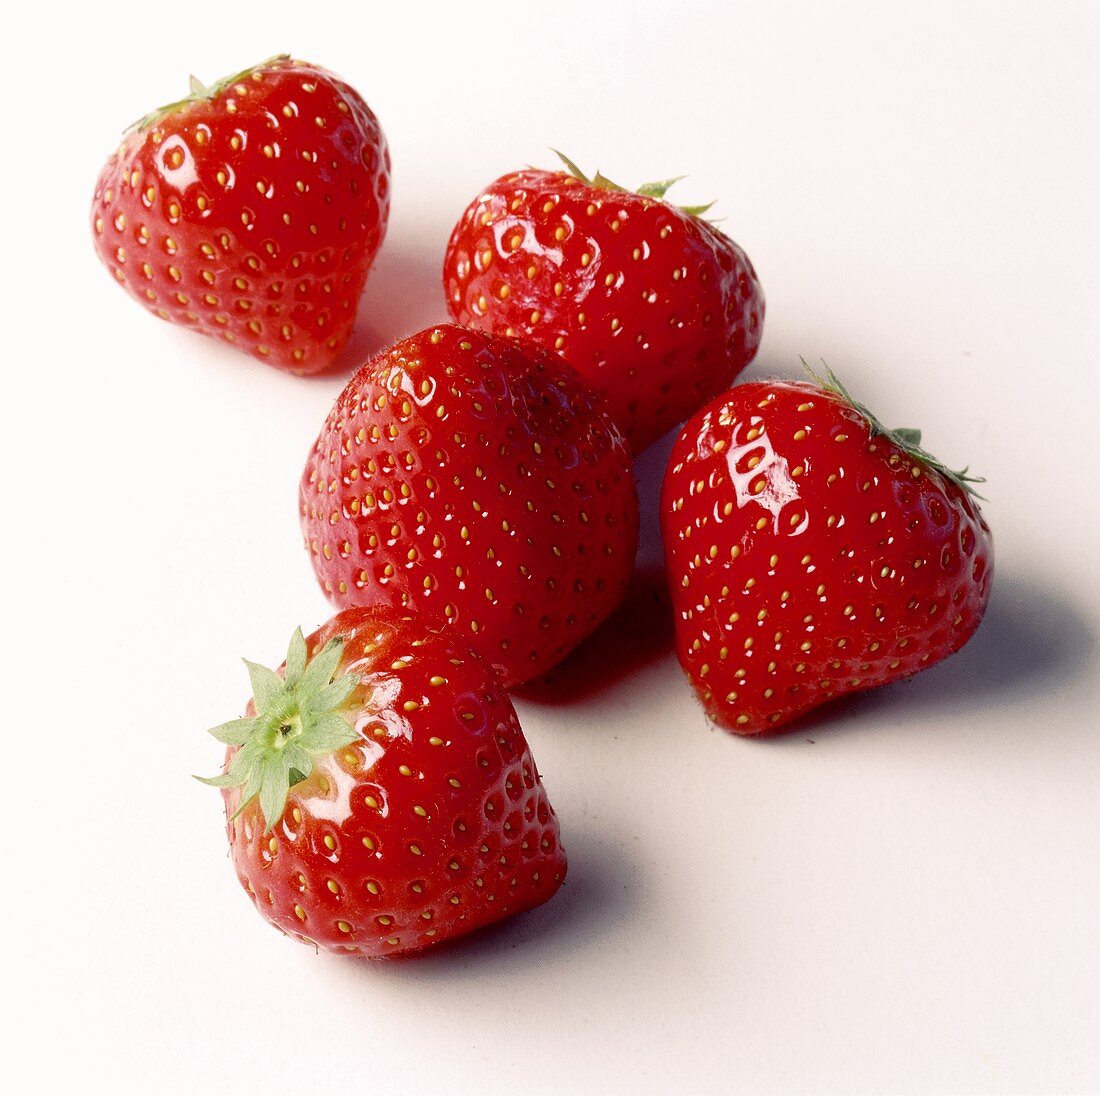 Five strawberries on white background